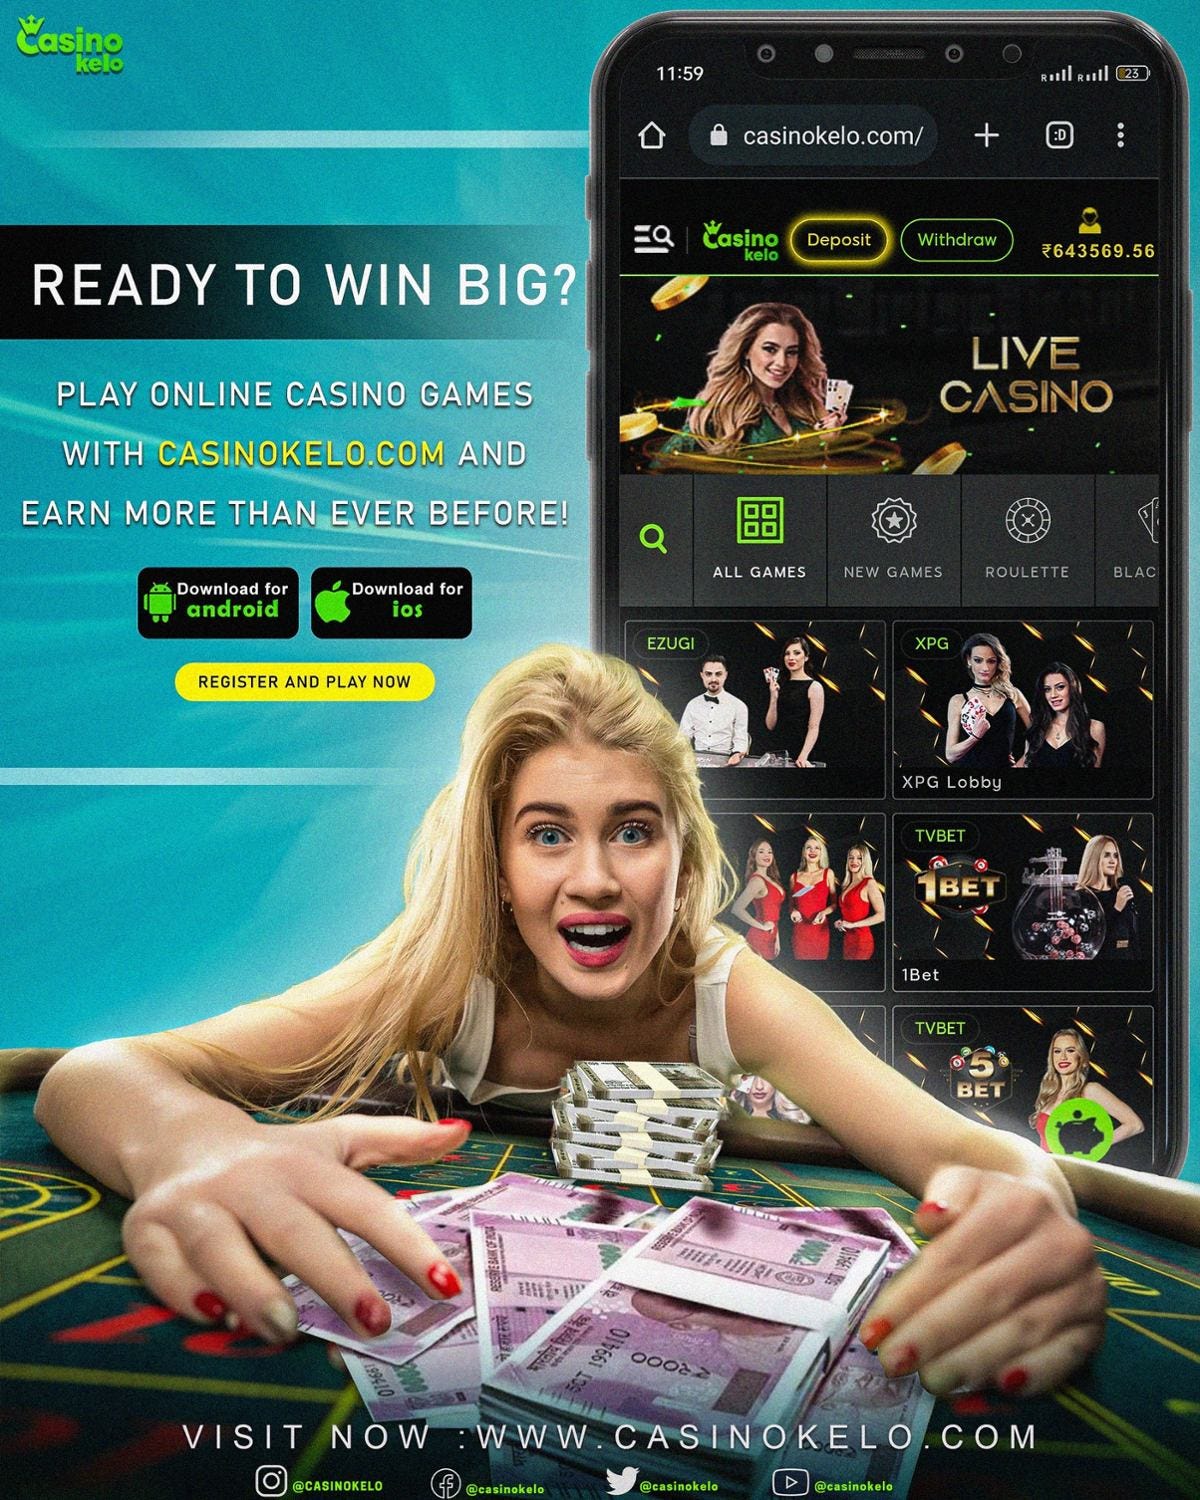 Marriage And Dive into the World of Krikya: Enjoy the online Krikya Casino Experience Anywhere with the Krikya App Have More In Common Than You Think